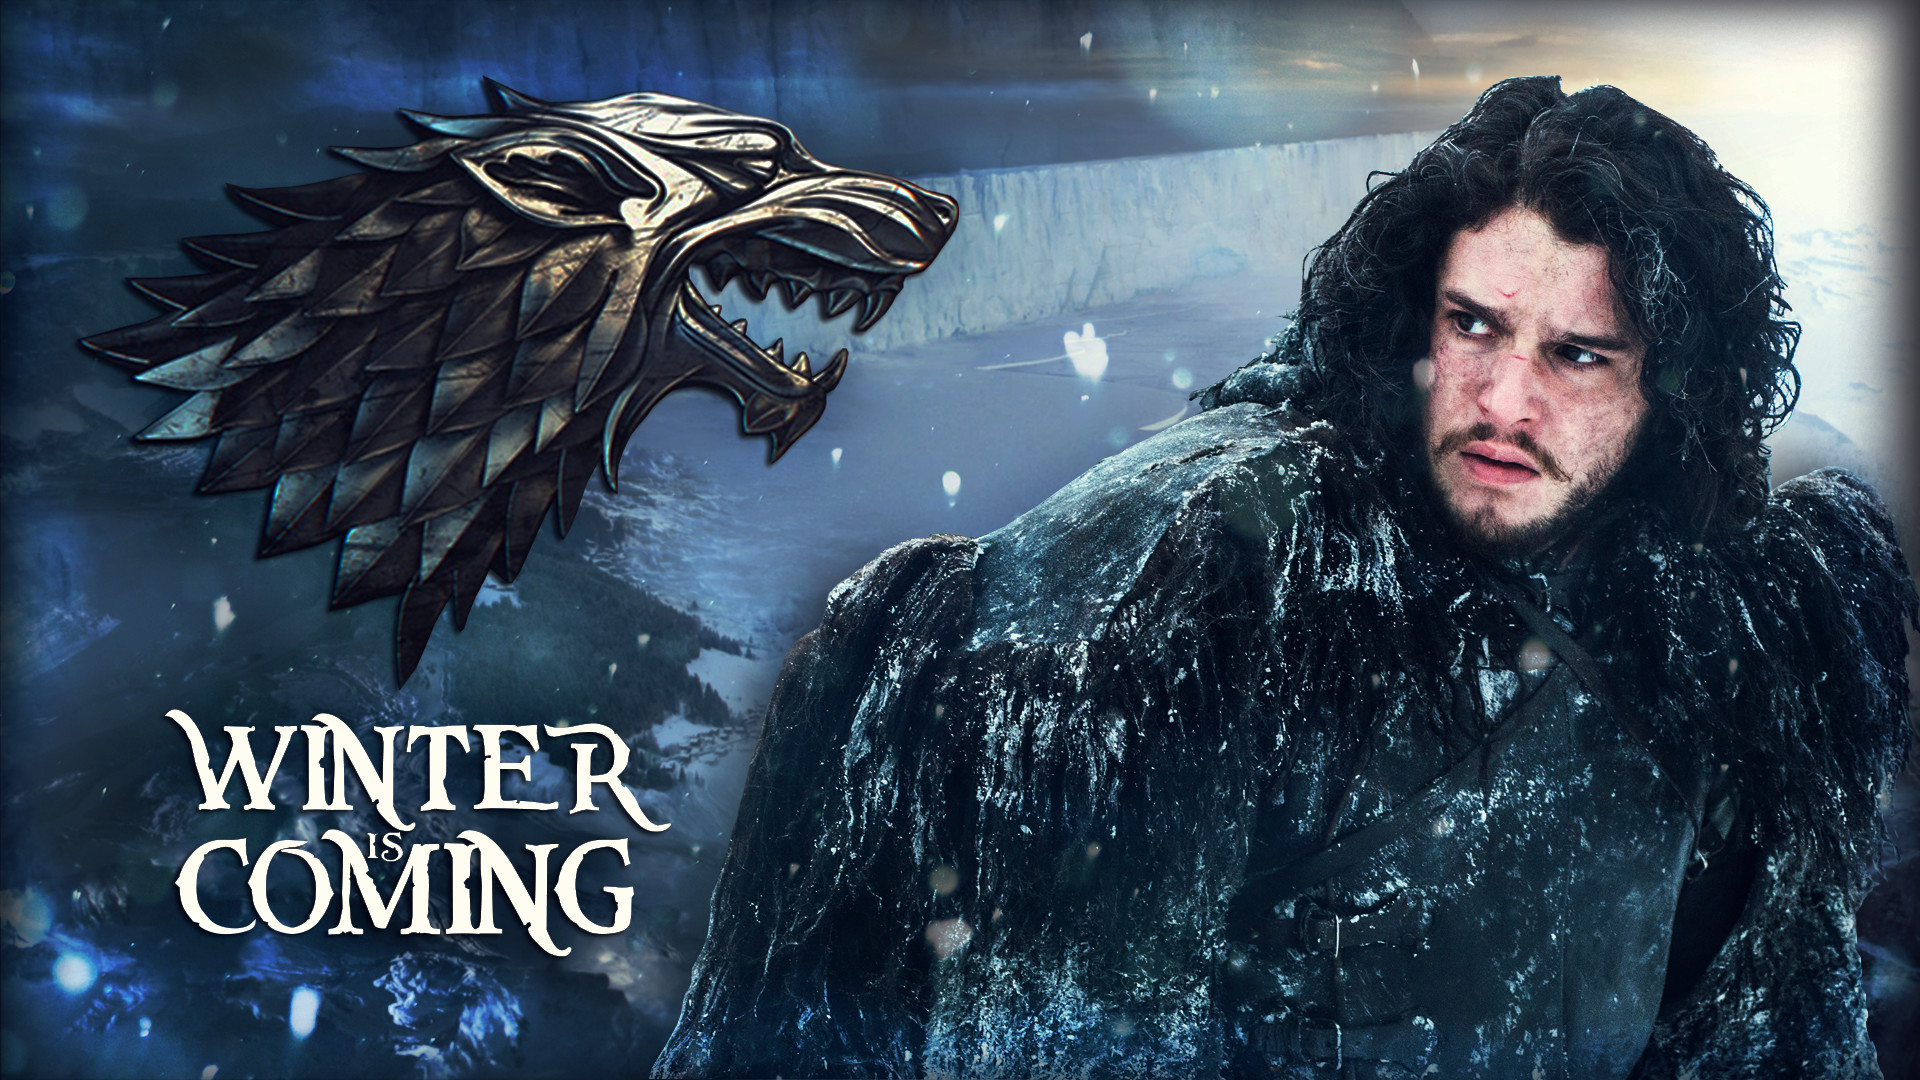 1920x1080 ... Game of Thrones - Jon Snow - Winter is coming! by GusseArt